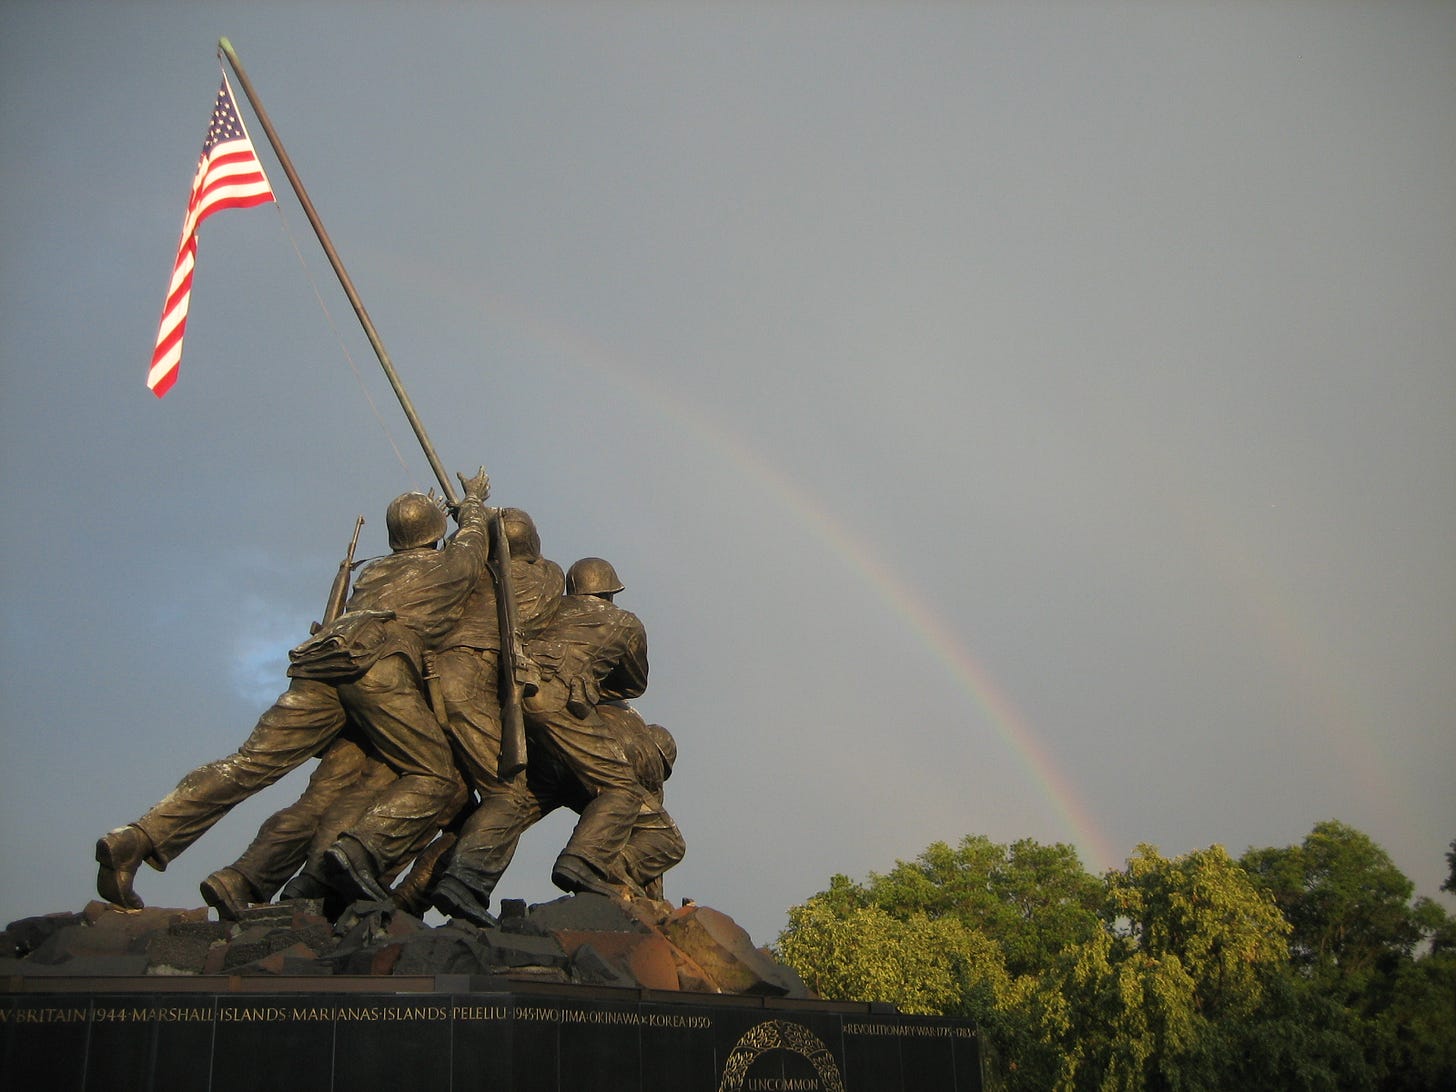 The Memorial is pictured with a double rainbow in the background.